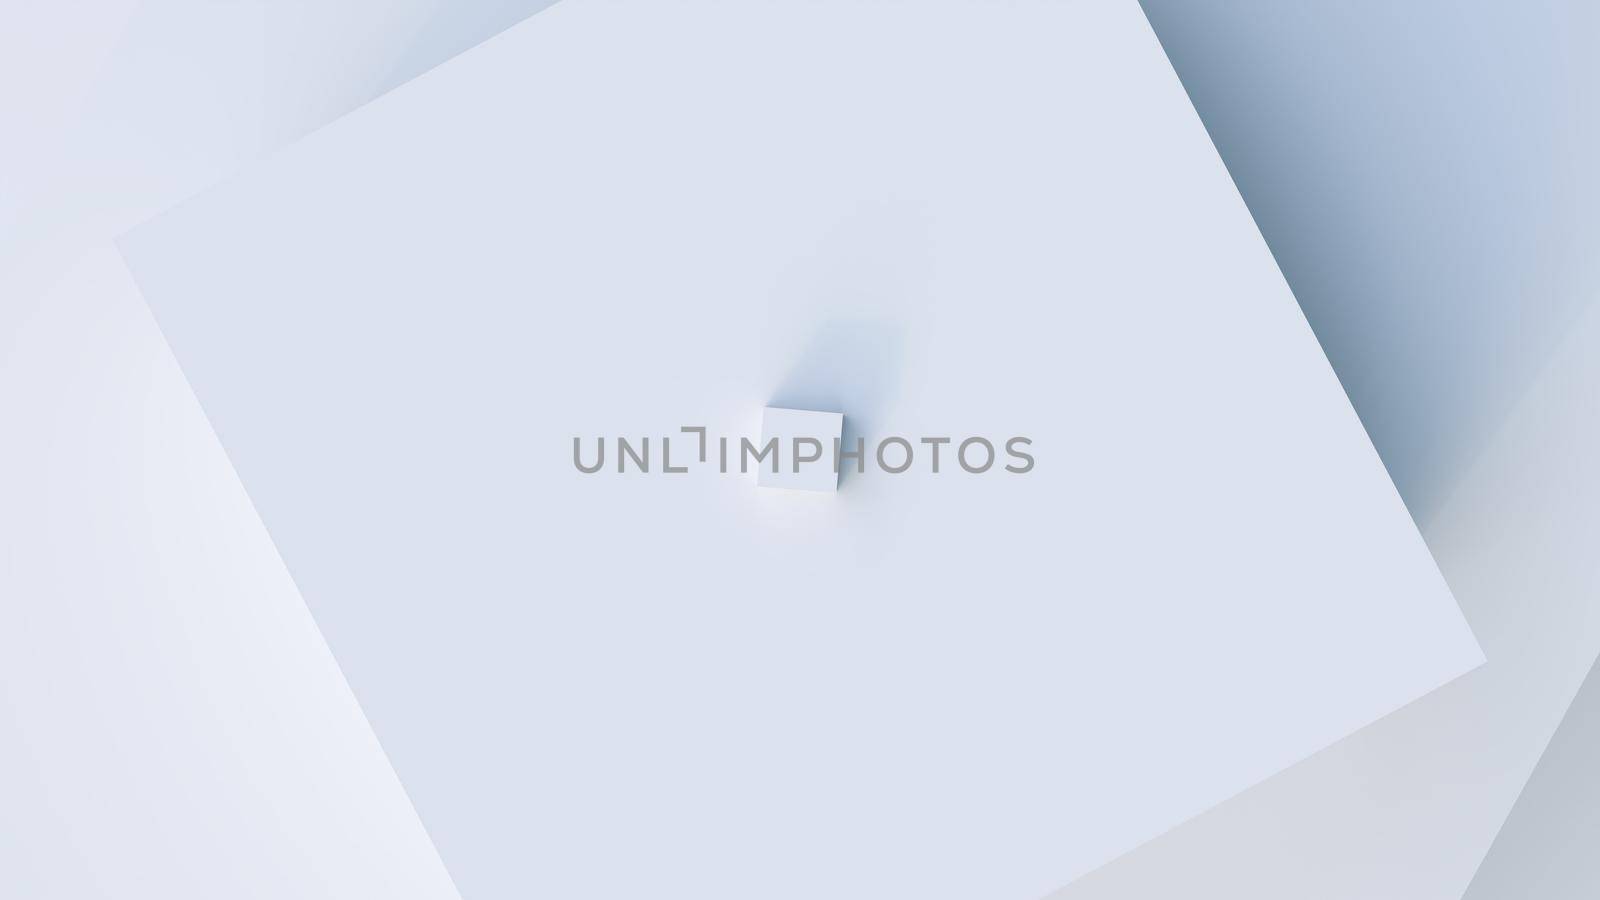 White cubes abstract background. 3d illustration. Background for your design